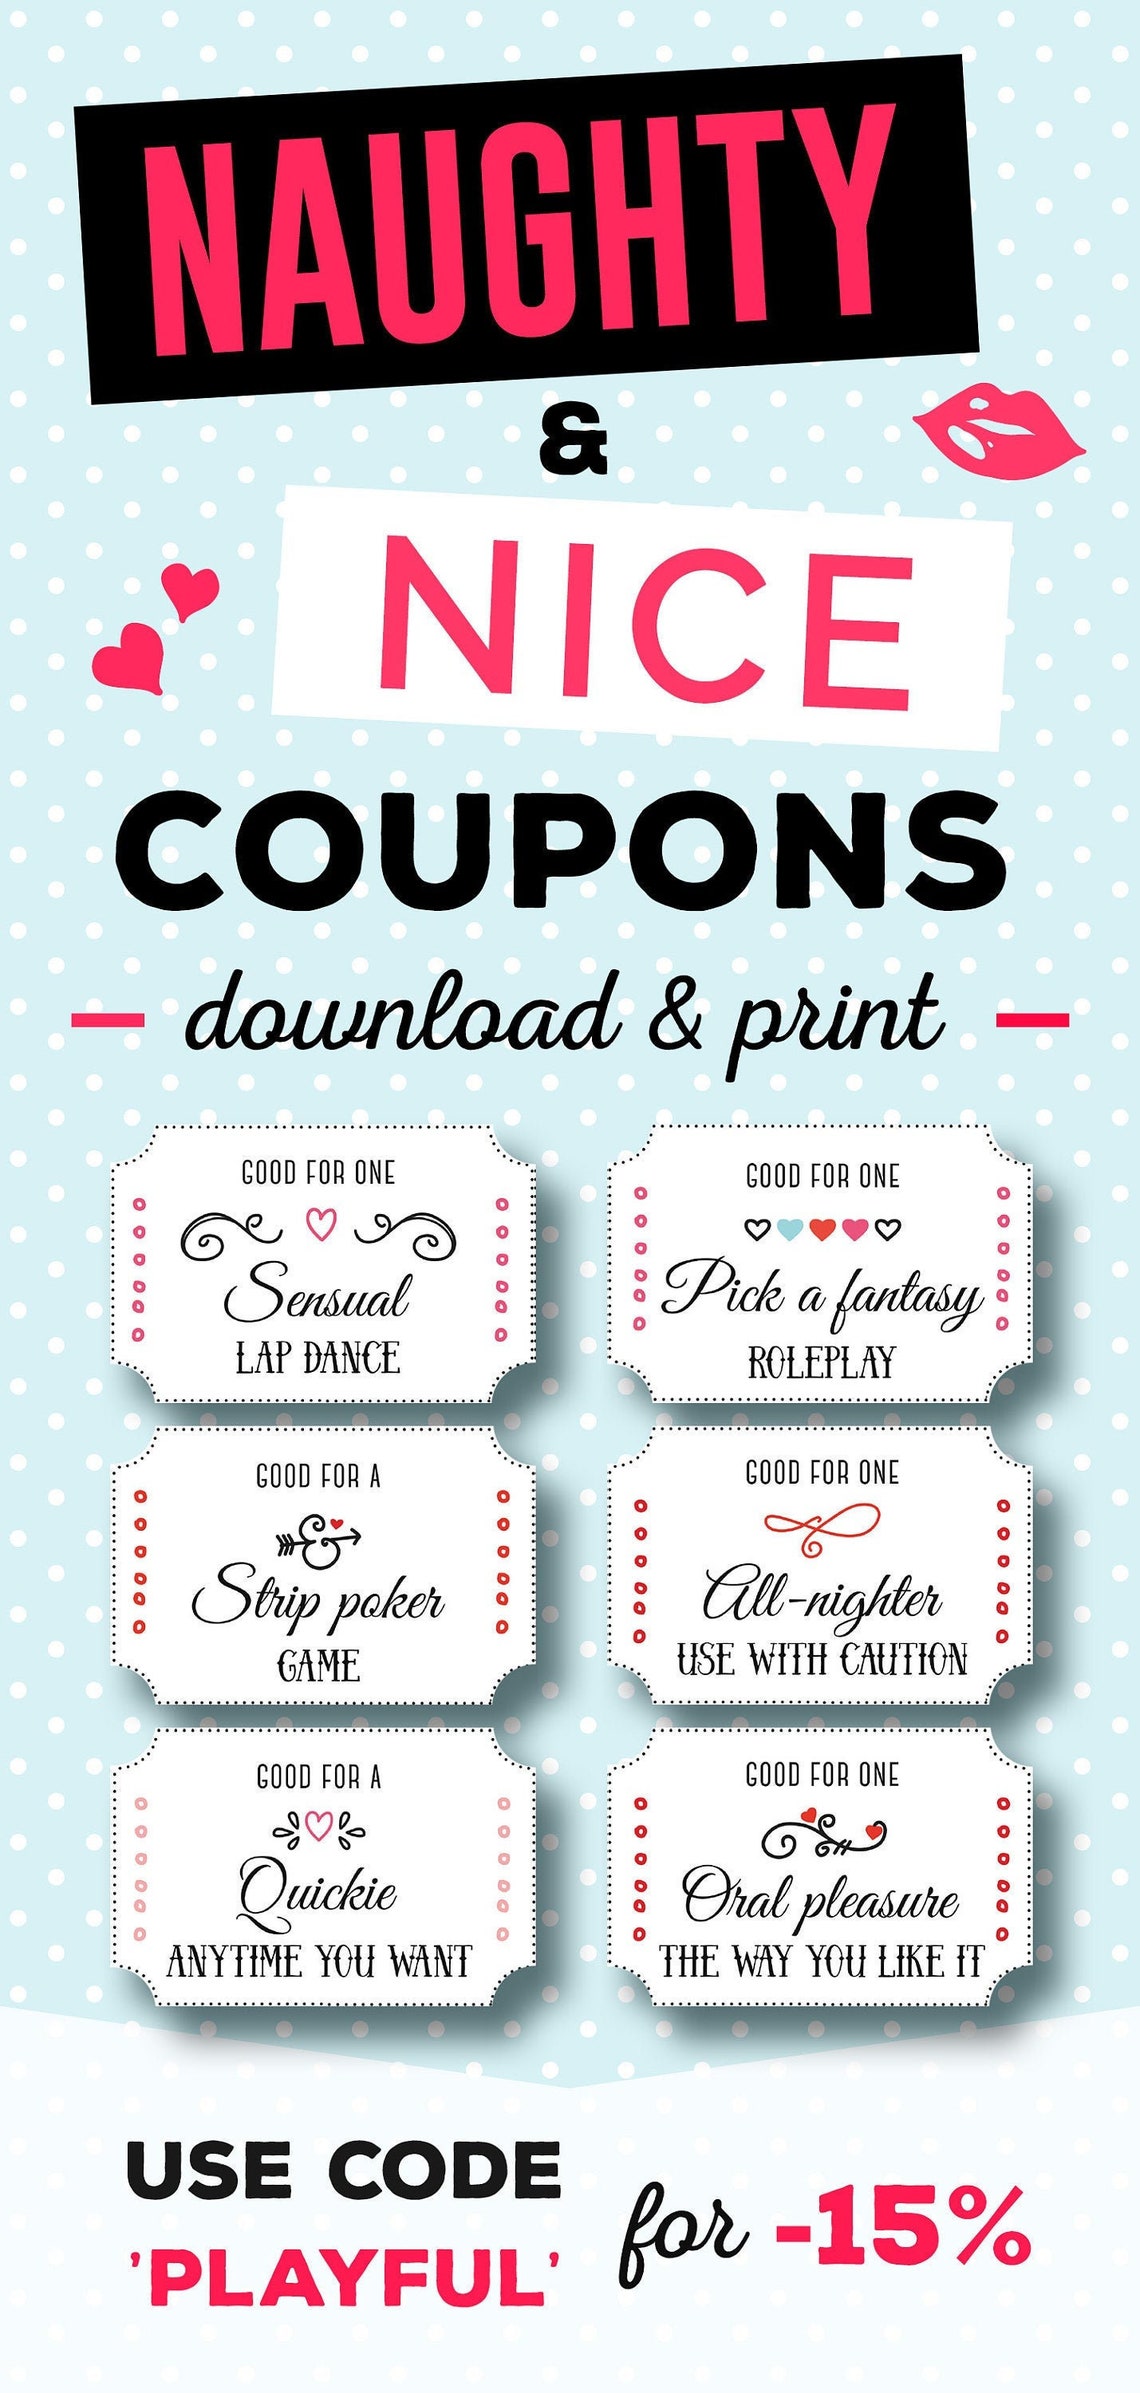 naughty-coupon-book-for-him-love-coupon-for-him-sex-coupon-etsy-singapore